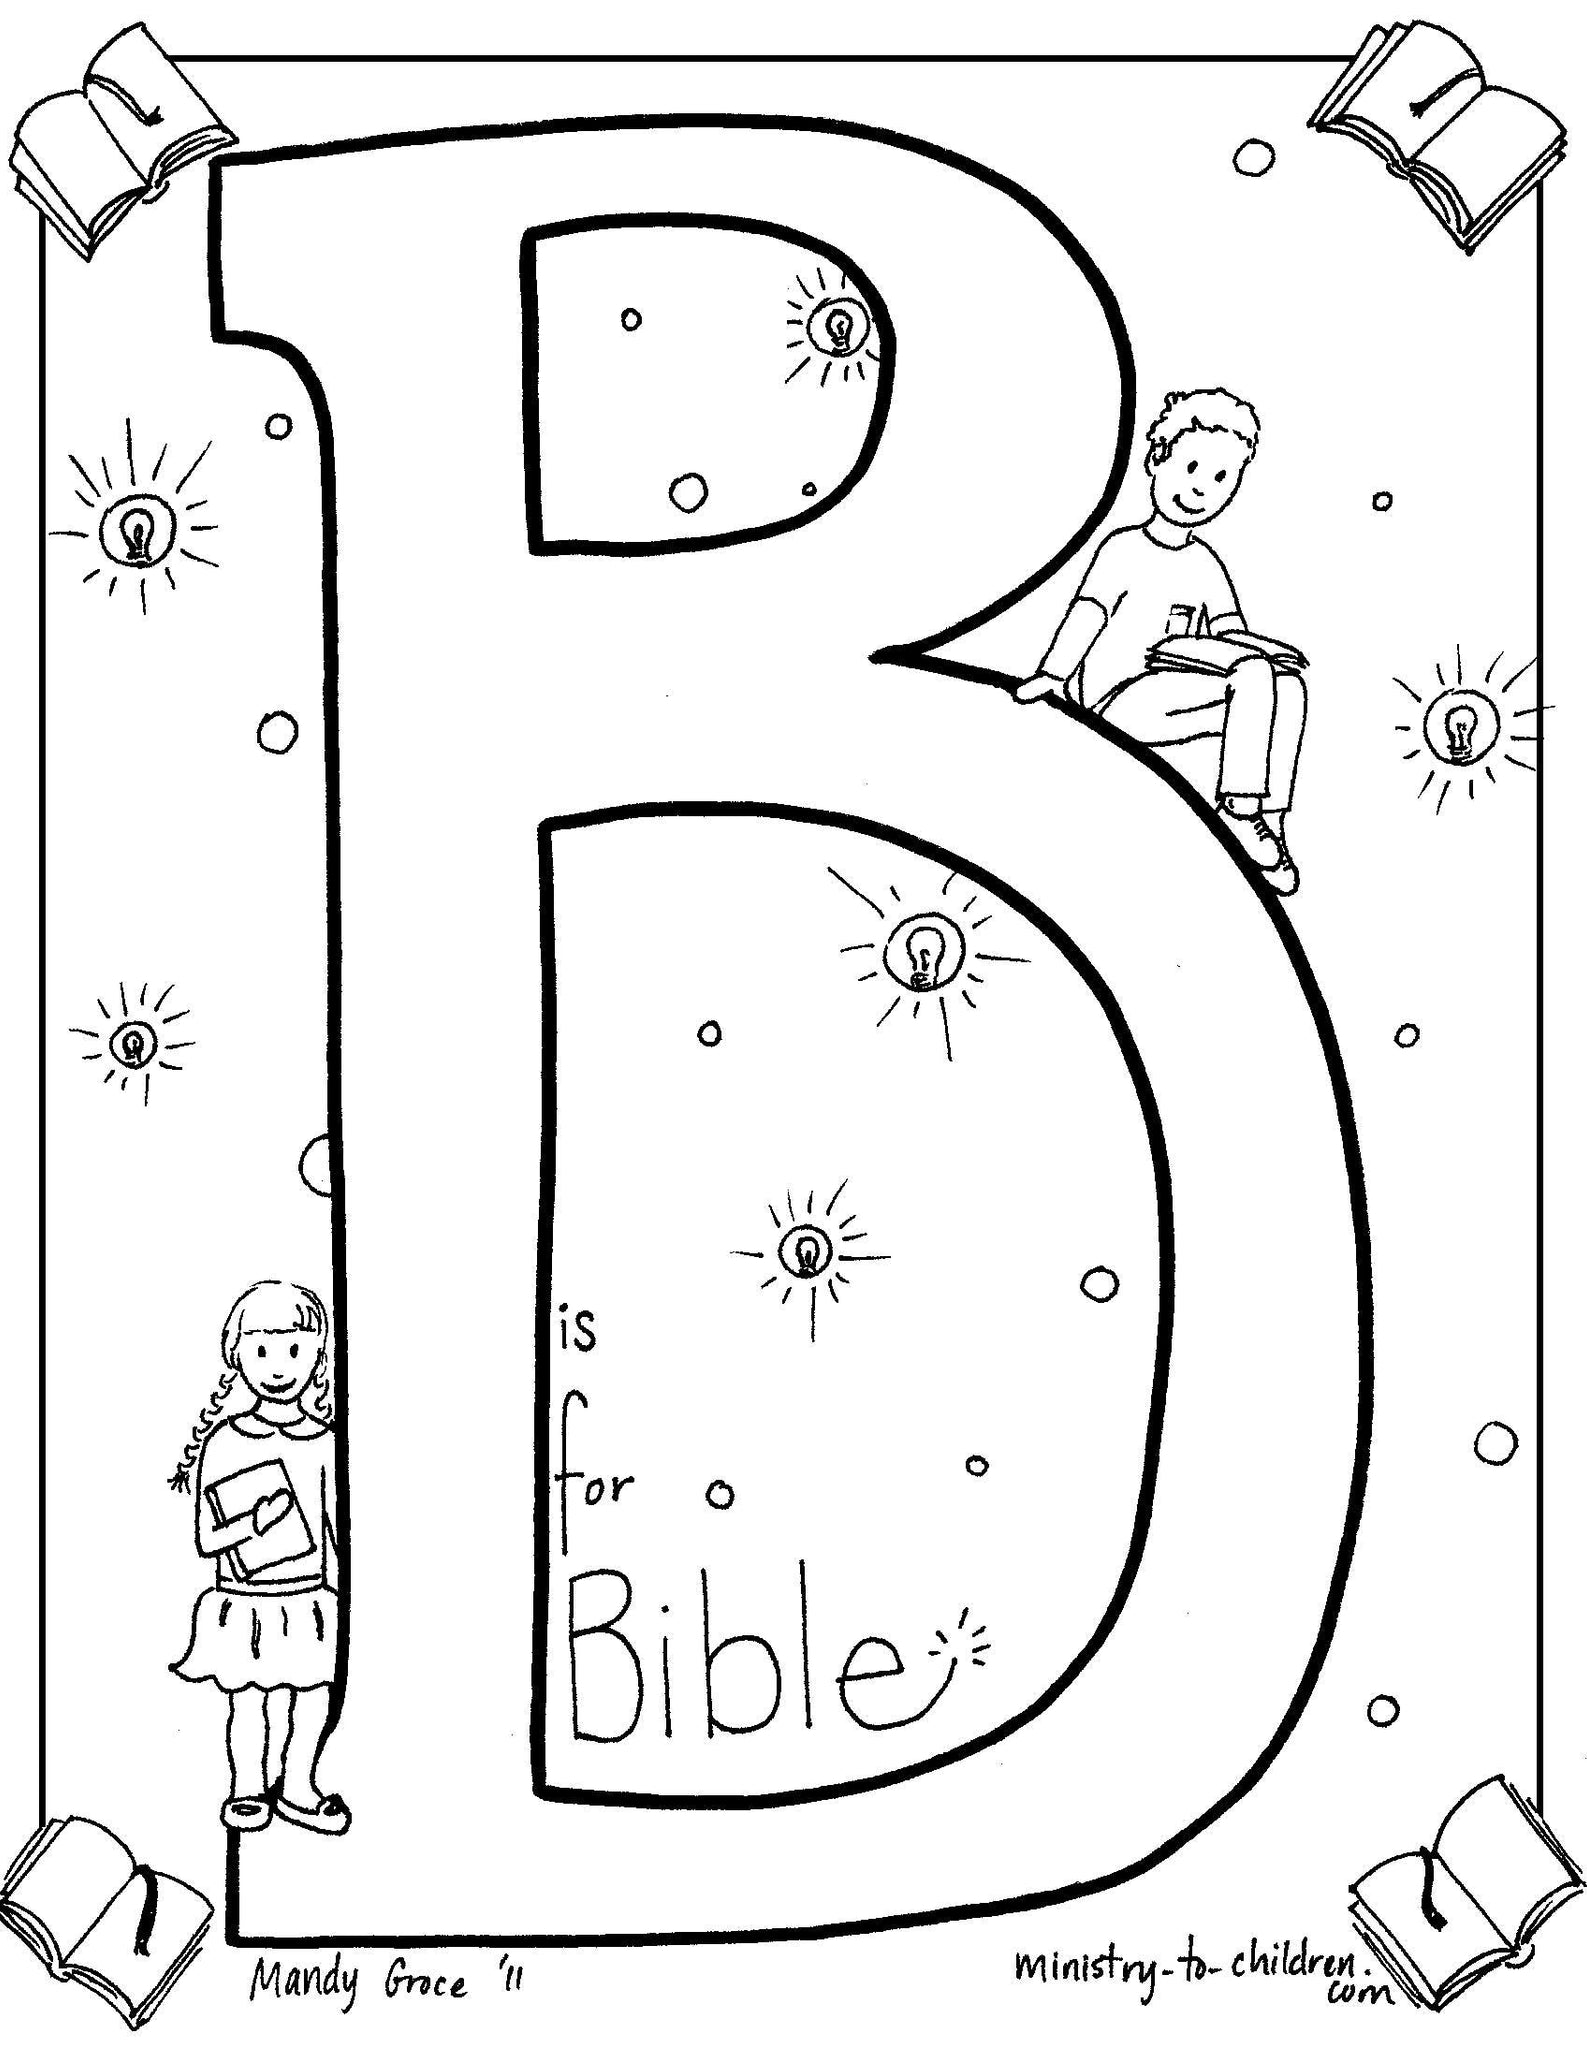 Bible Alphabet Coloring Pages (26 pages) download only – The Sunday